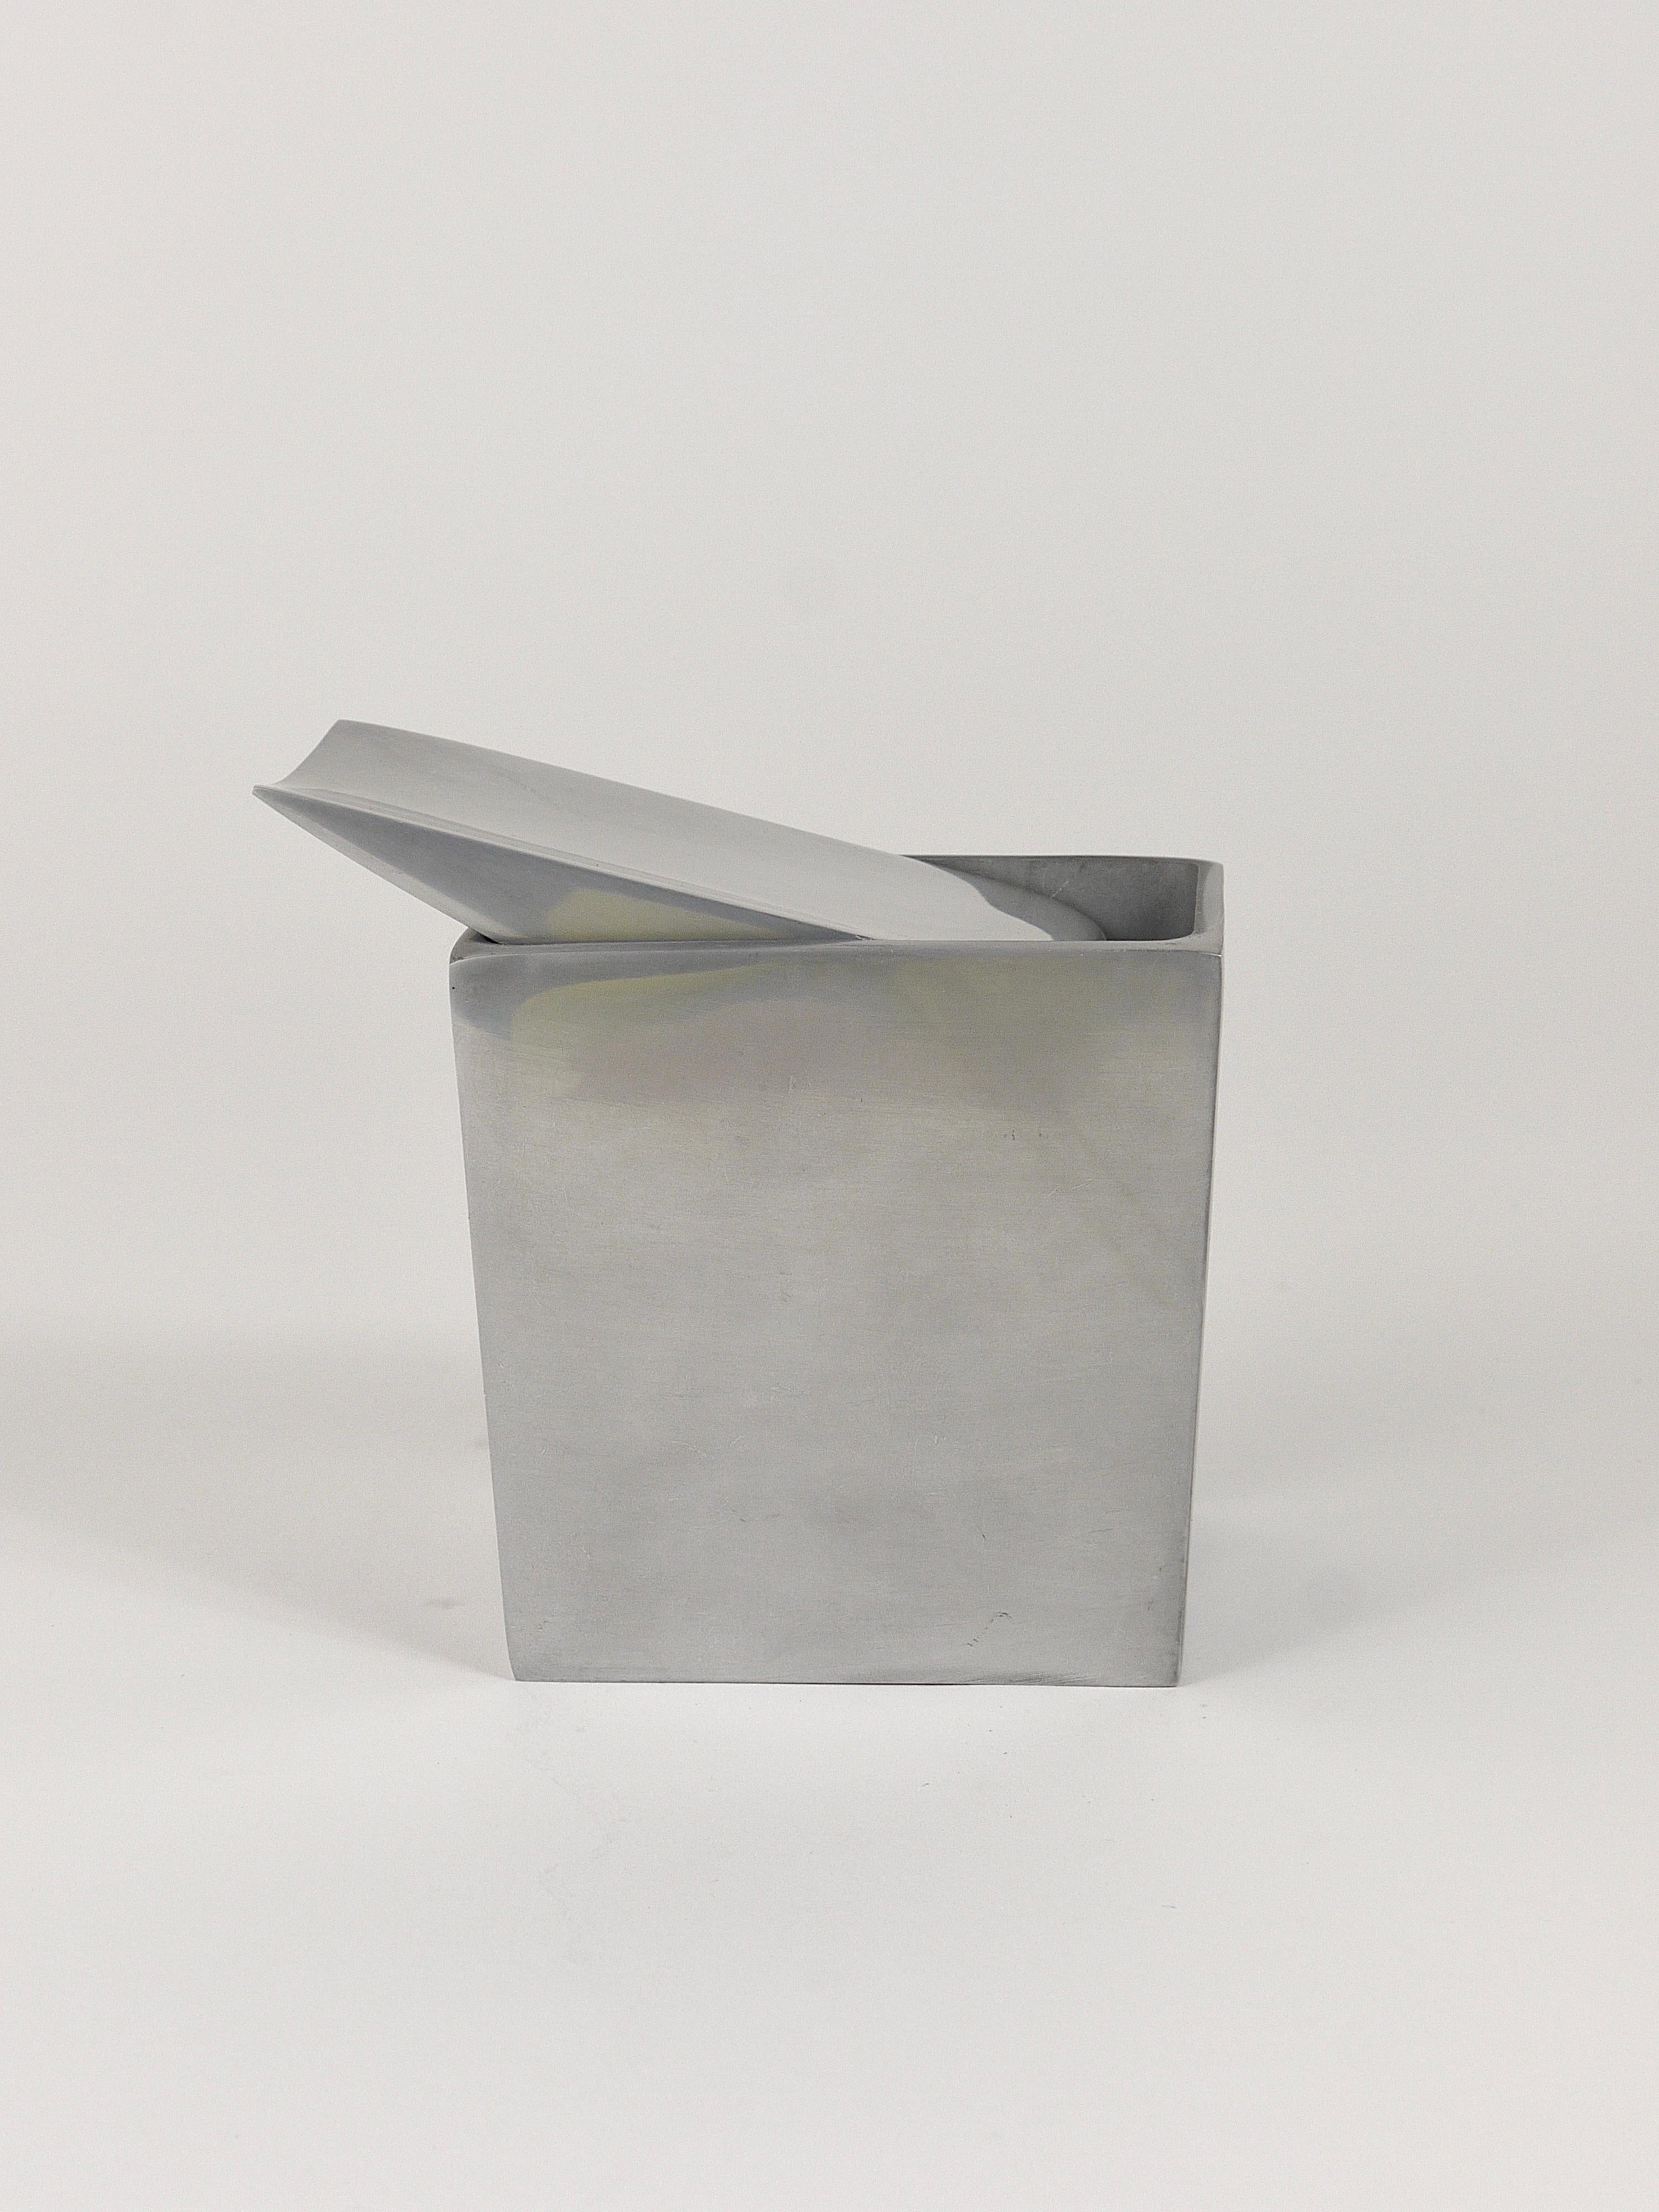 Iconic tilting wing ashtray designed in 1986 by Philippe Starck for the Royalton Hotel in New York. Executed by XO, France. 
Made of polished aluminum, signed on the inside of the lid. Part of the MoMA design collection. In good condition with